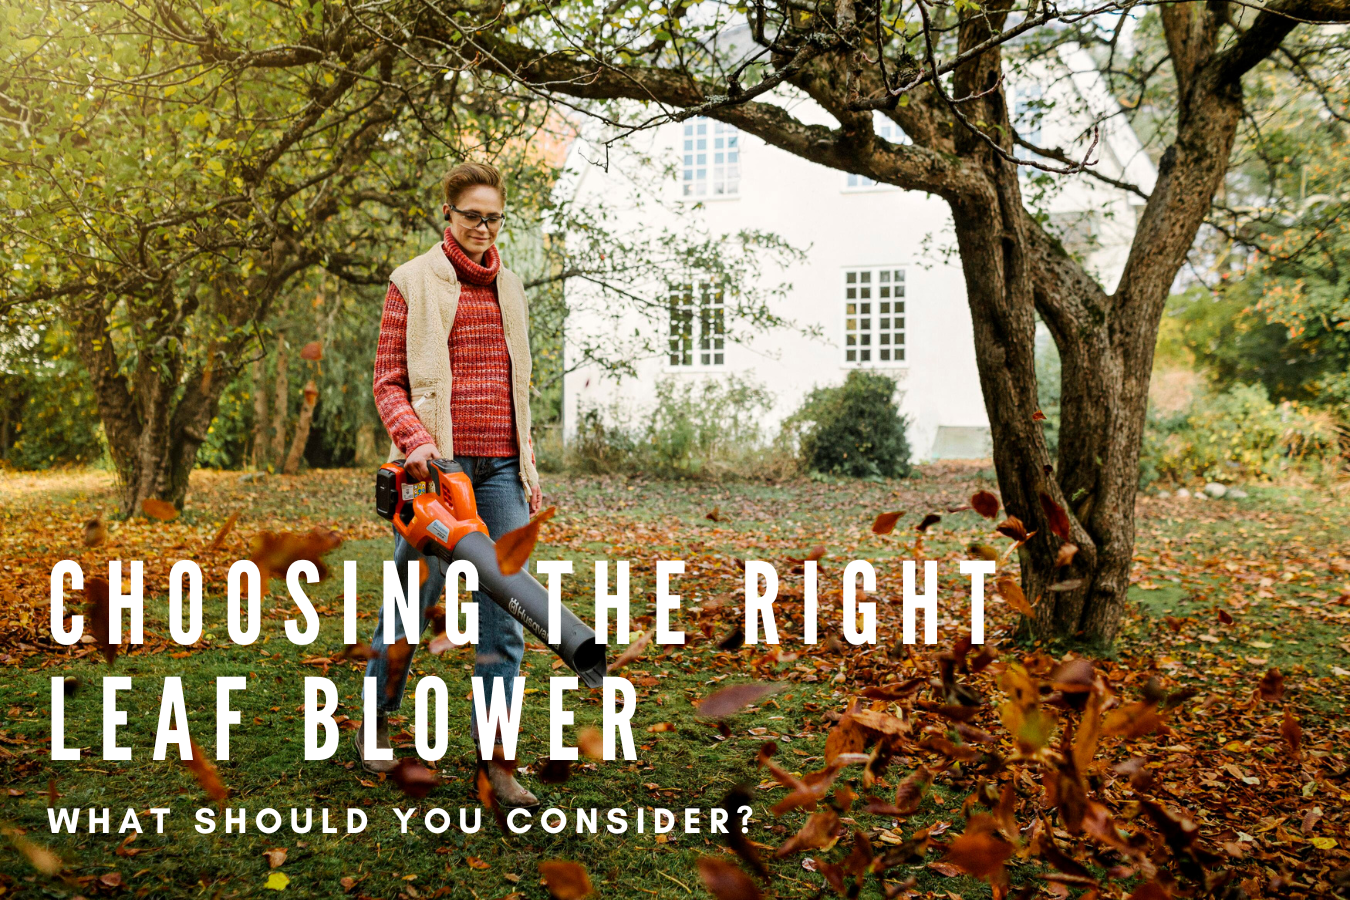 Choosing the right leaf blower. what should you consider?